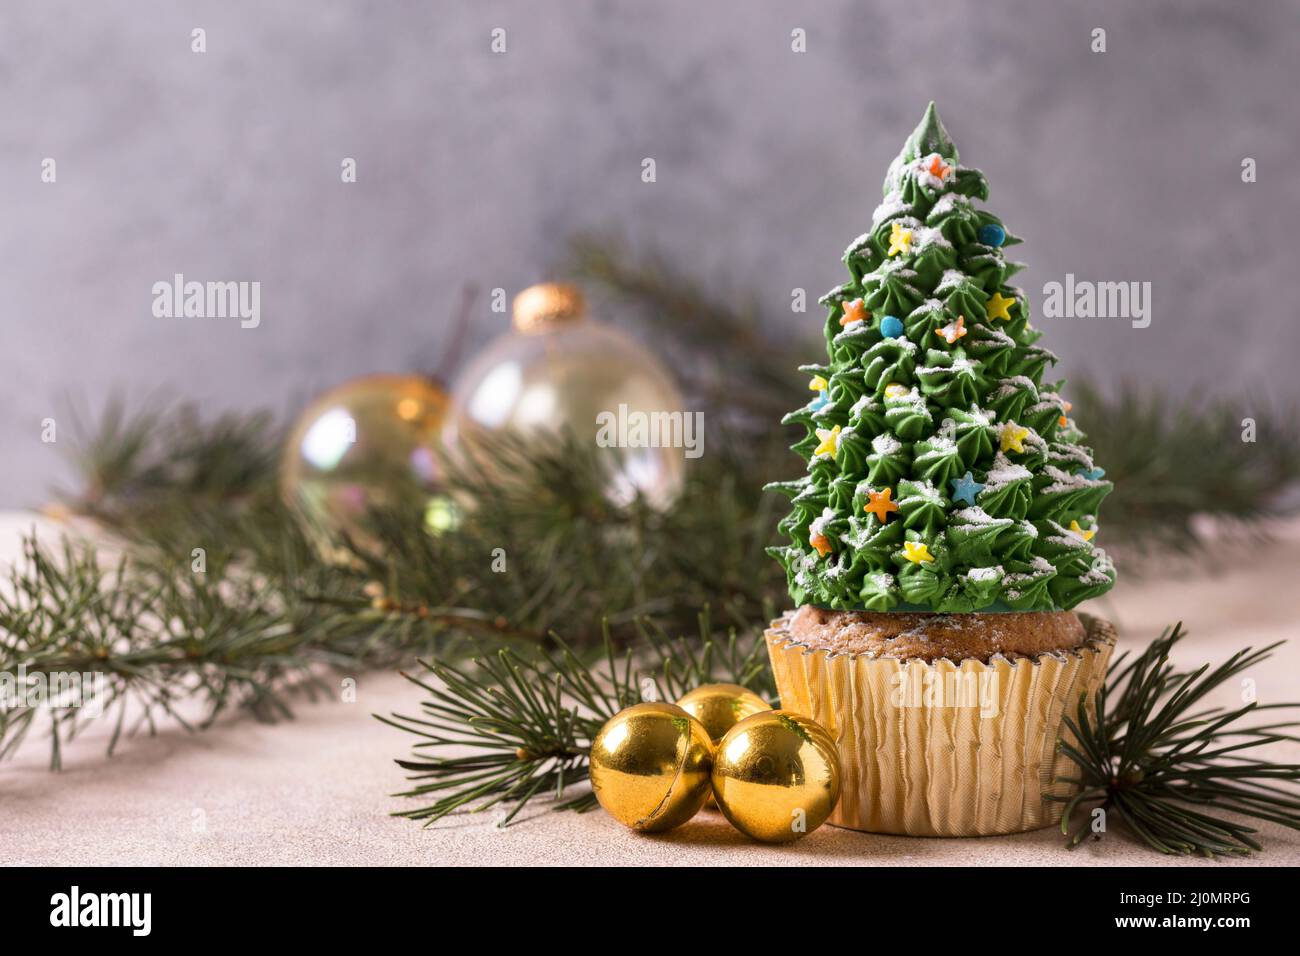 Front view cupcake with christmas tree frosting Stock Photo